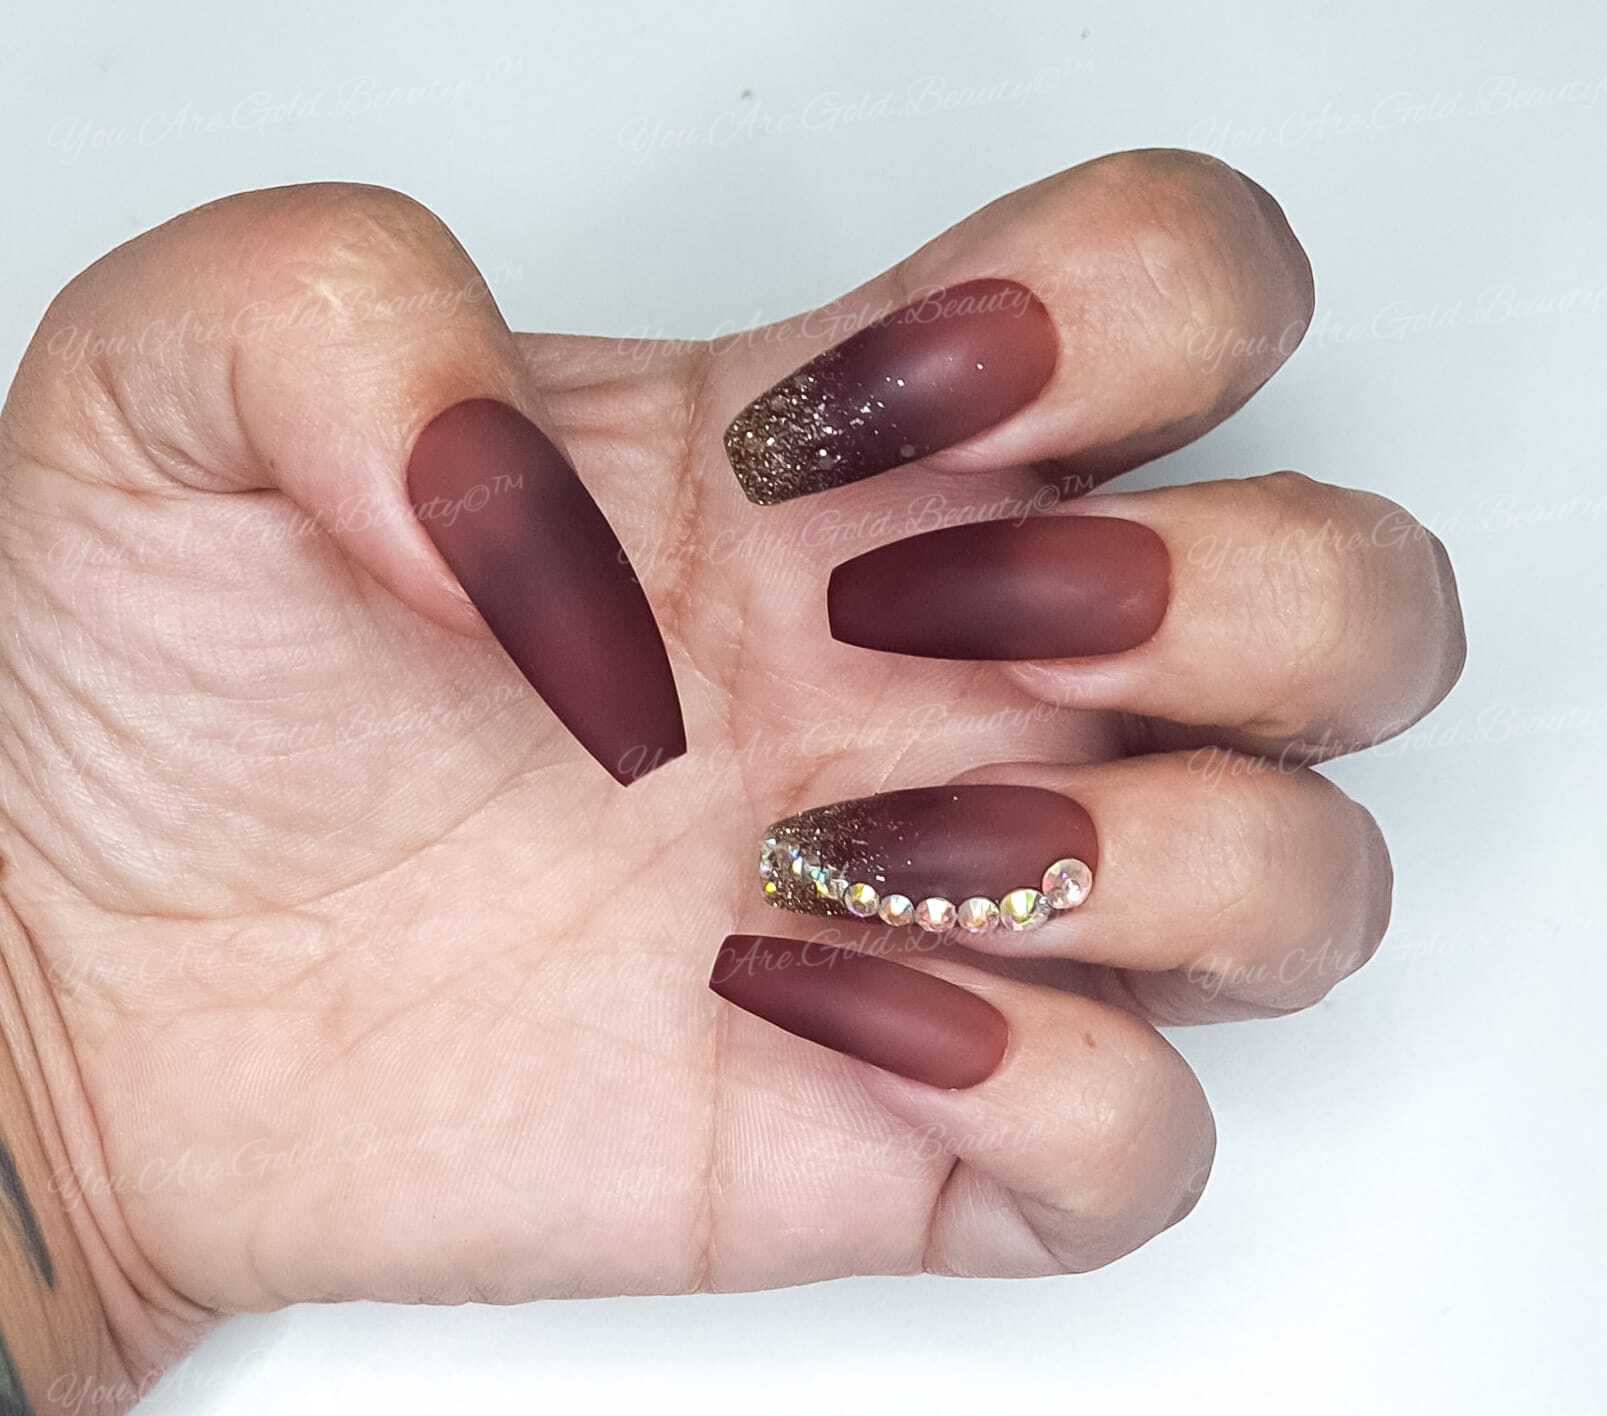 Golden Nails - 𝗖𝗢𝗙𝗙𝗜𝗡 𝗦𝗛𝗔𝗣𝗘𝗗 𝗡𝗔𝗜𝗟𝗦 👉 Would you ever get coffin  nails? Let's try out this popular nail trend when you're planning to be on  vacation and not having to worry